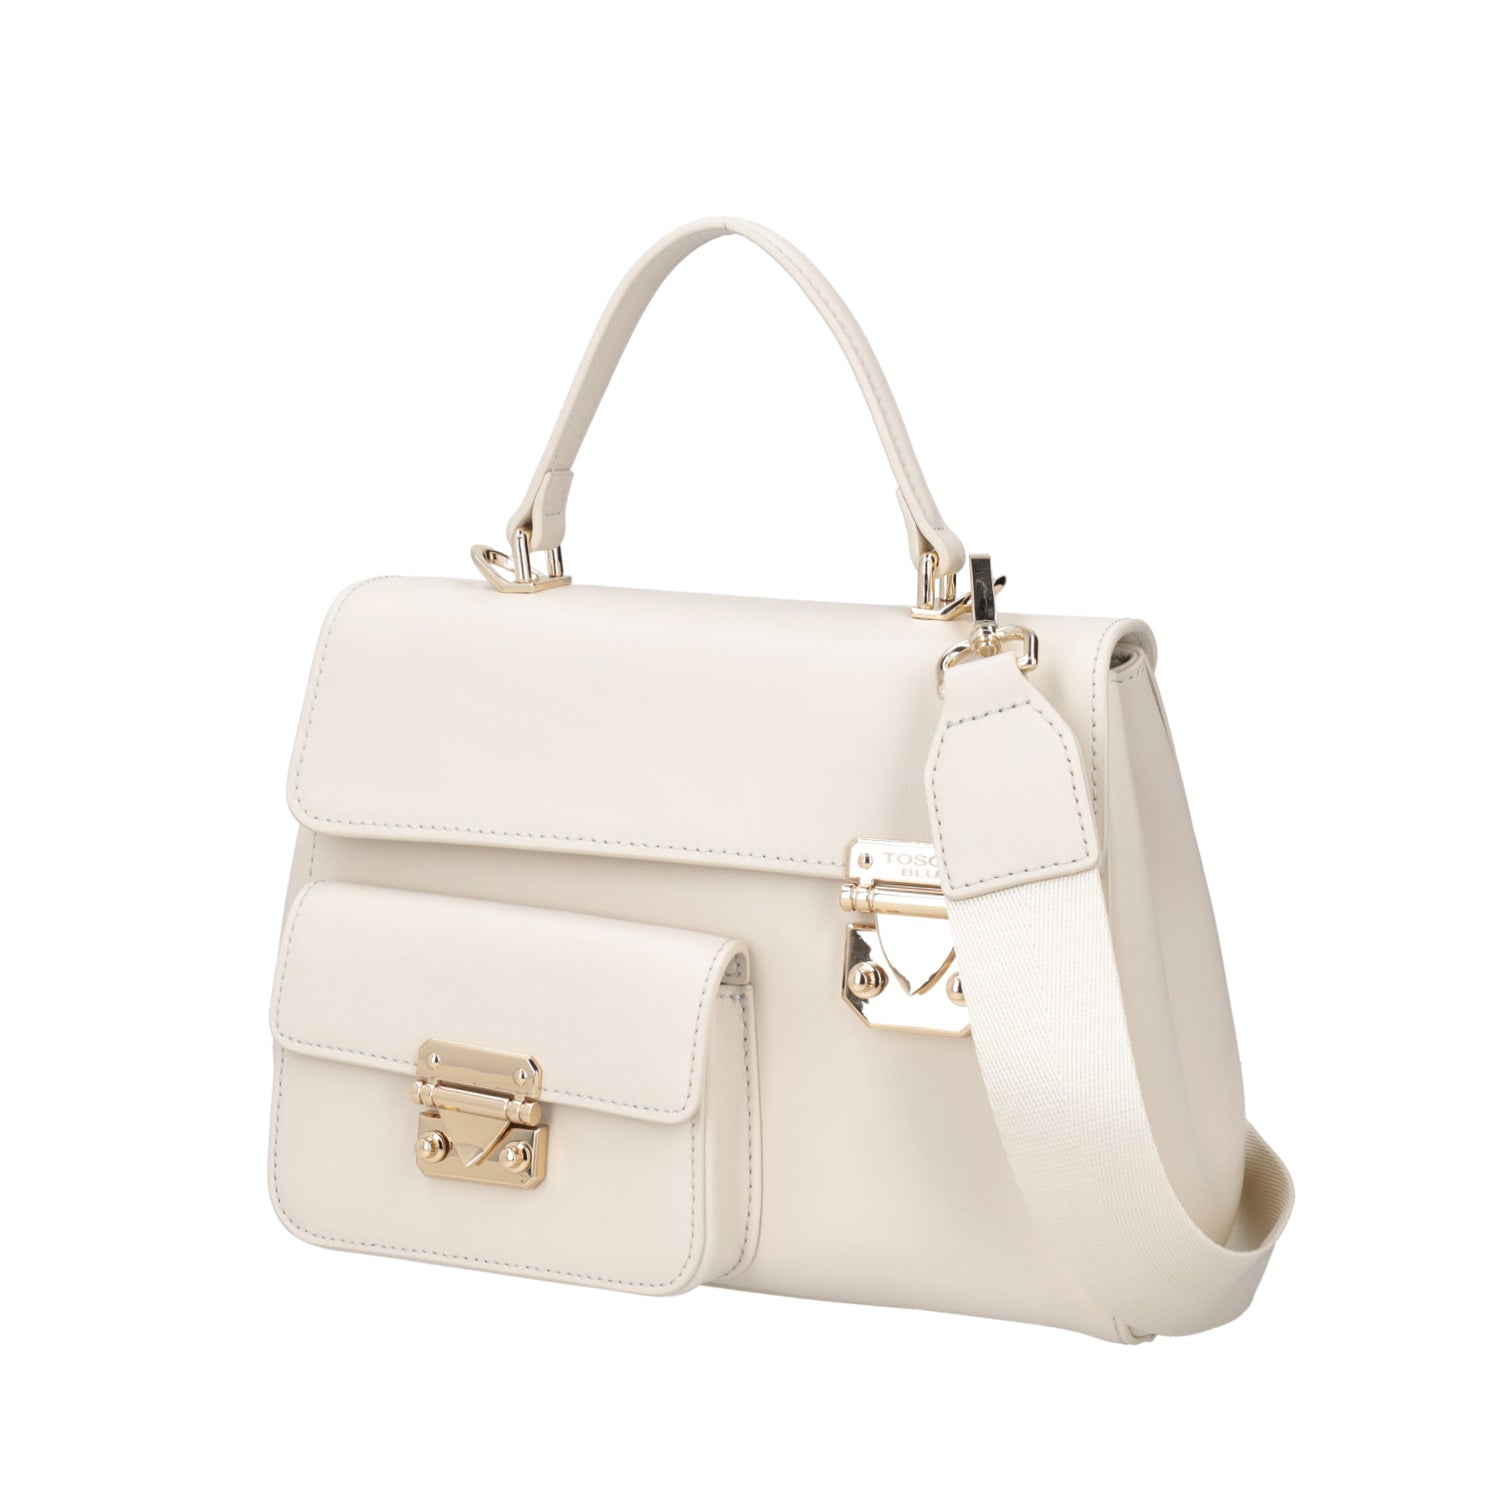 IVORY ANEMONE HAND BAG WITH GOLDEN ACCESSORIES